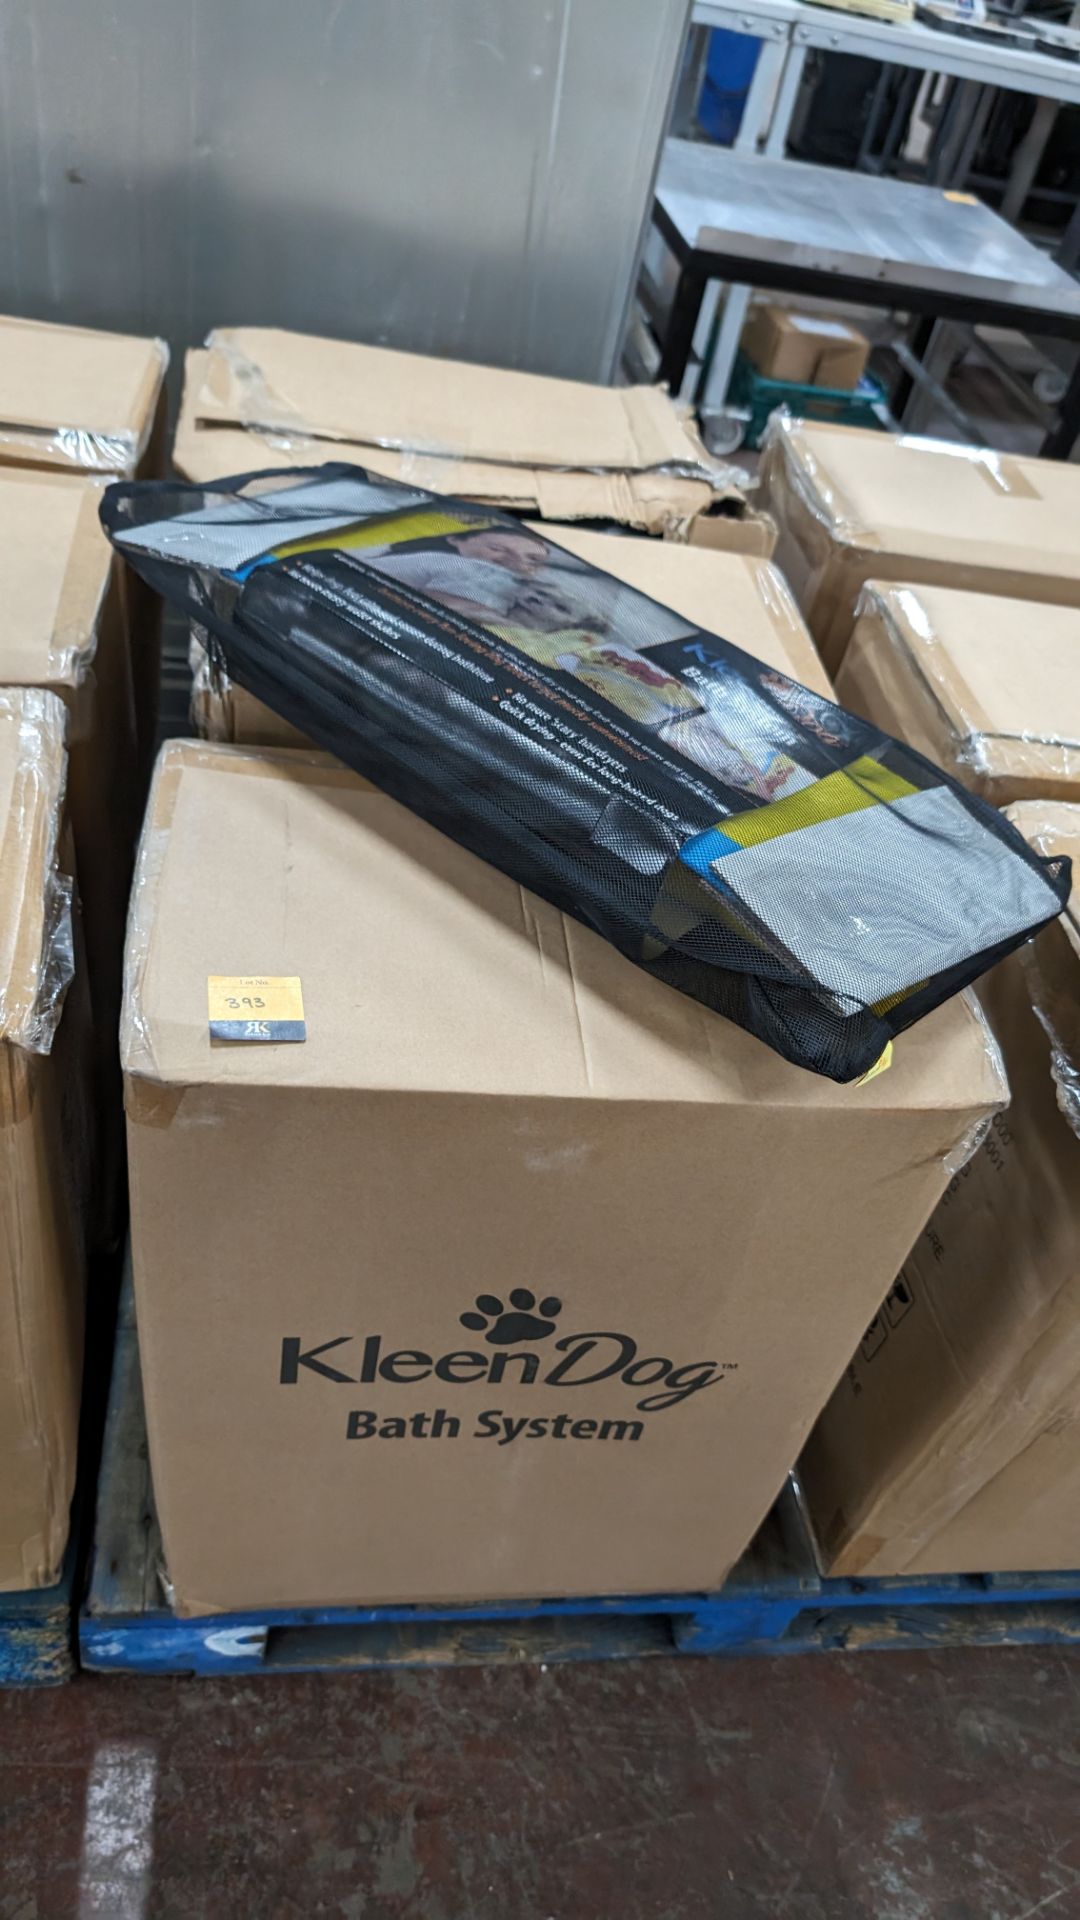 24 off Kleen Dog bath systems - 3 cartons - Image 5 of 6